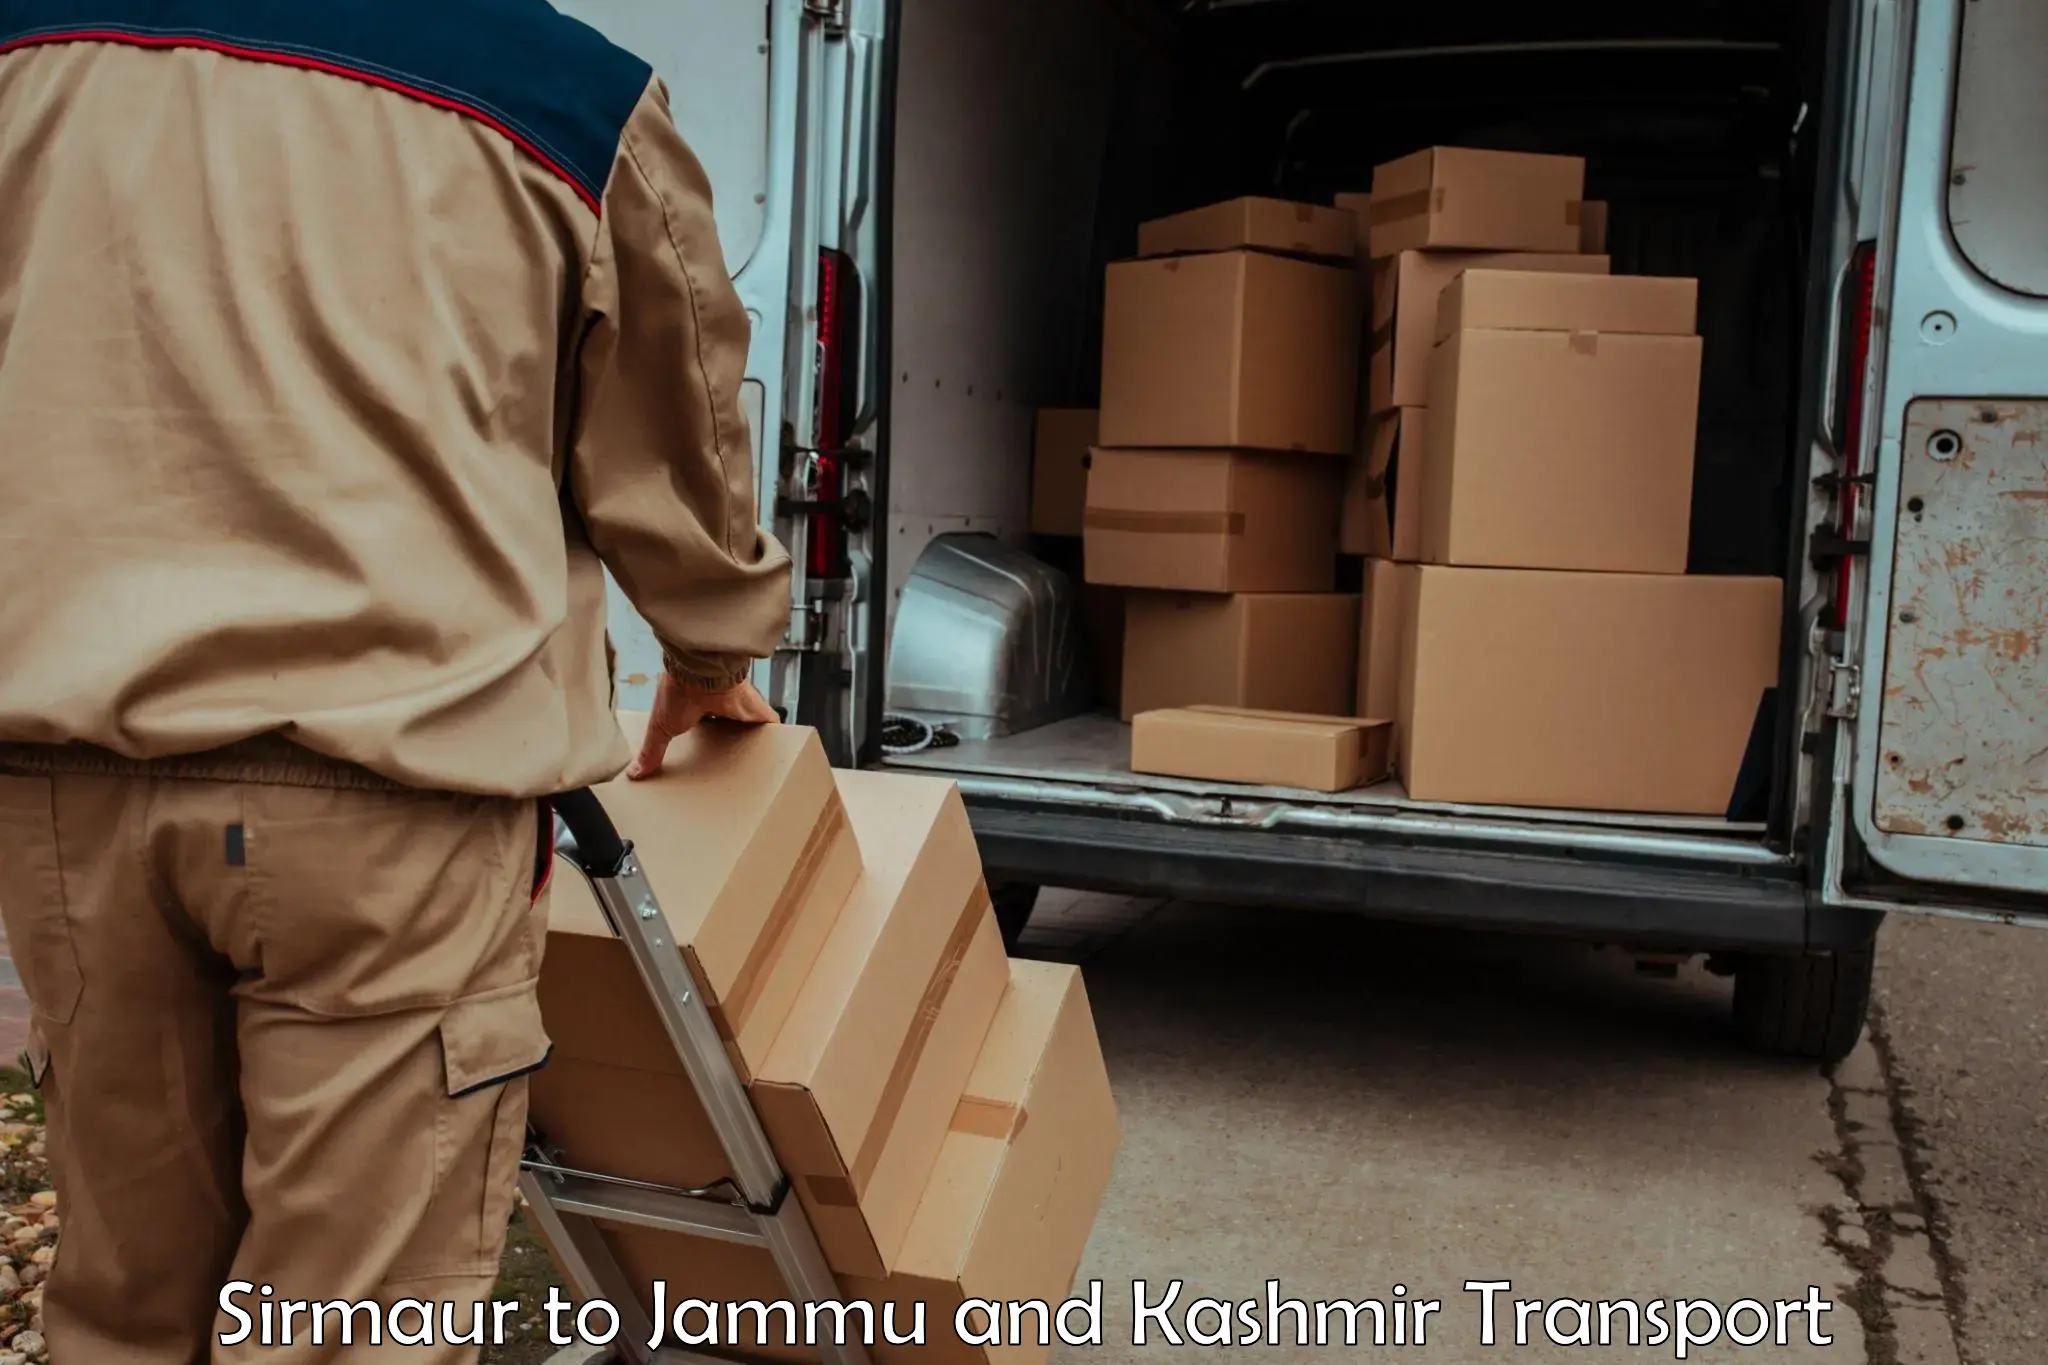 Parcel transport services Sirmaur to Bandipur